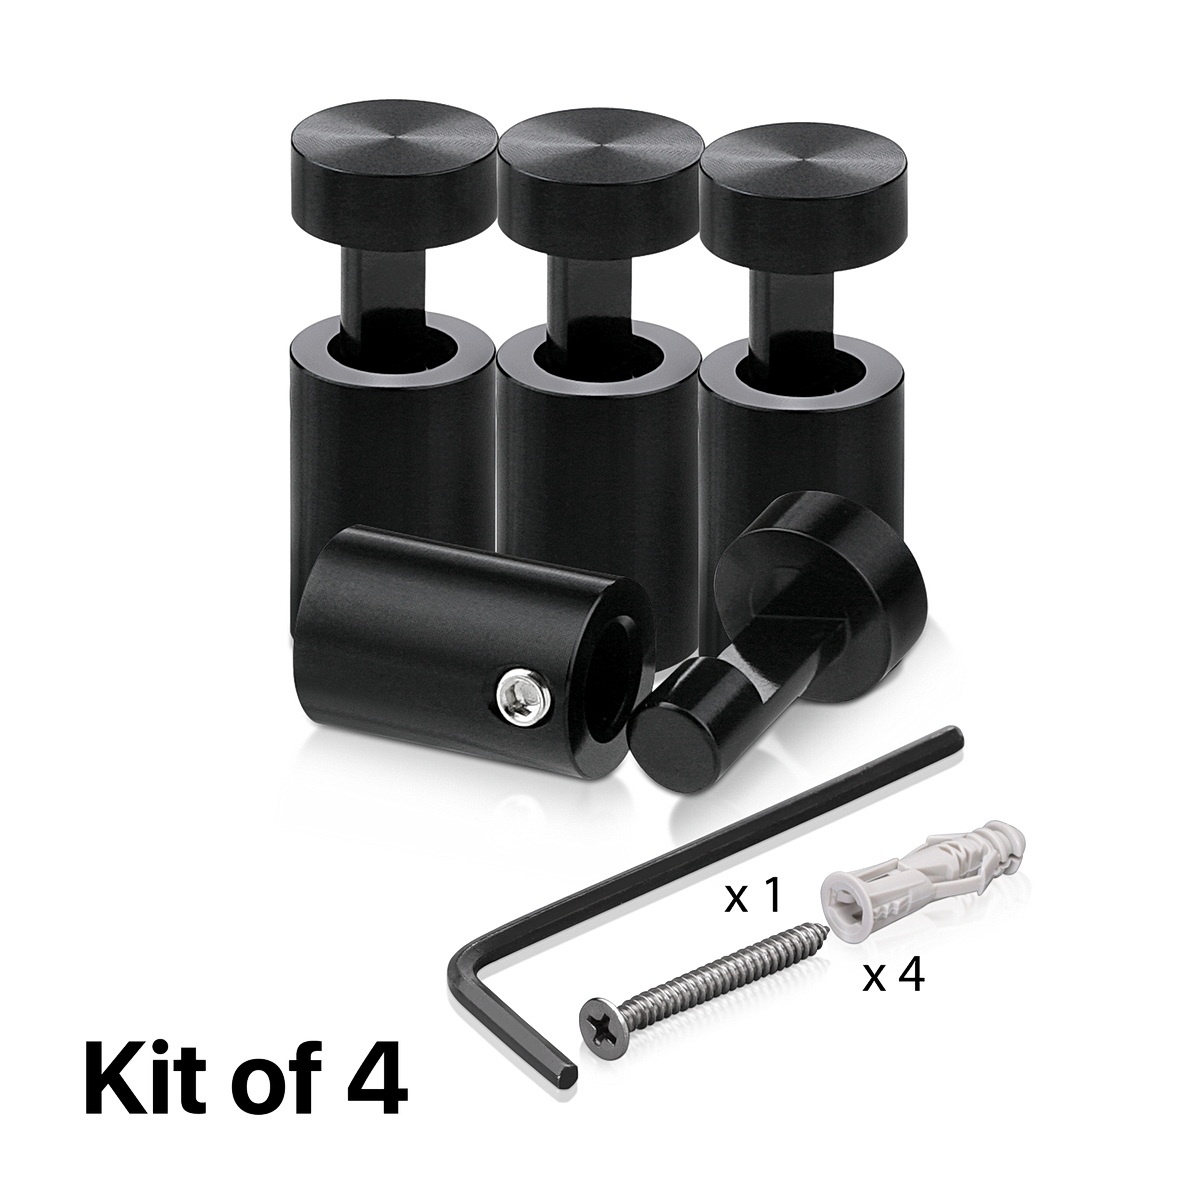 (Set of 4) 1/2'' Diameter X 3/4''  Barrel Length, Aluminum Black Anodized Finish. Adjustable Edge Grip Standoff with (4) 2208Z Screw and (4) LANC1 Anchor  for concrete/drywall (For Inside Use Only)